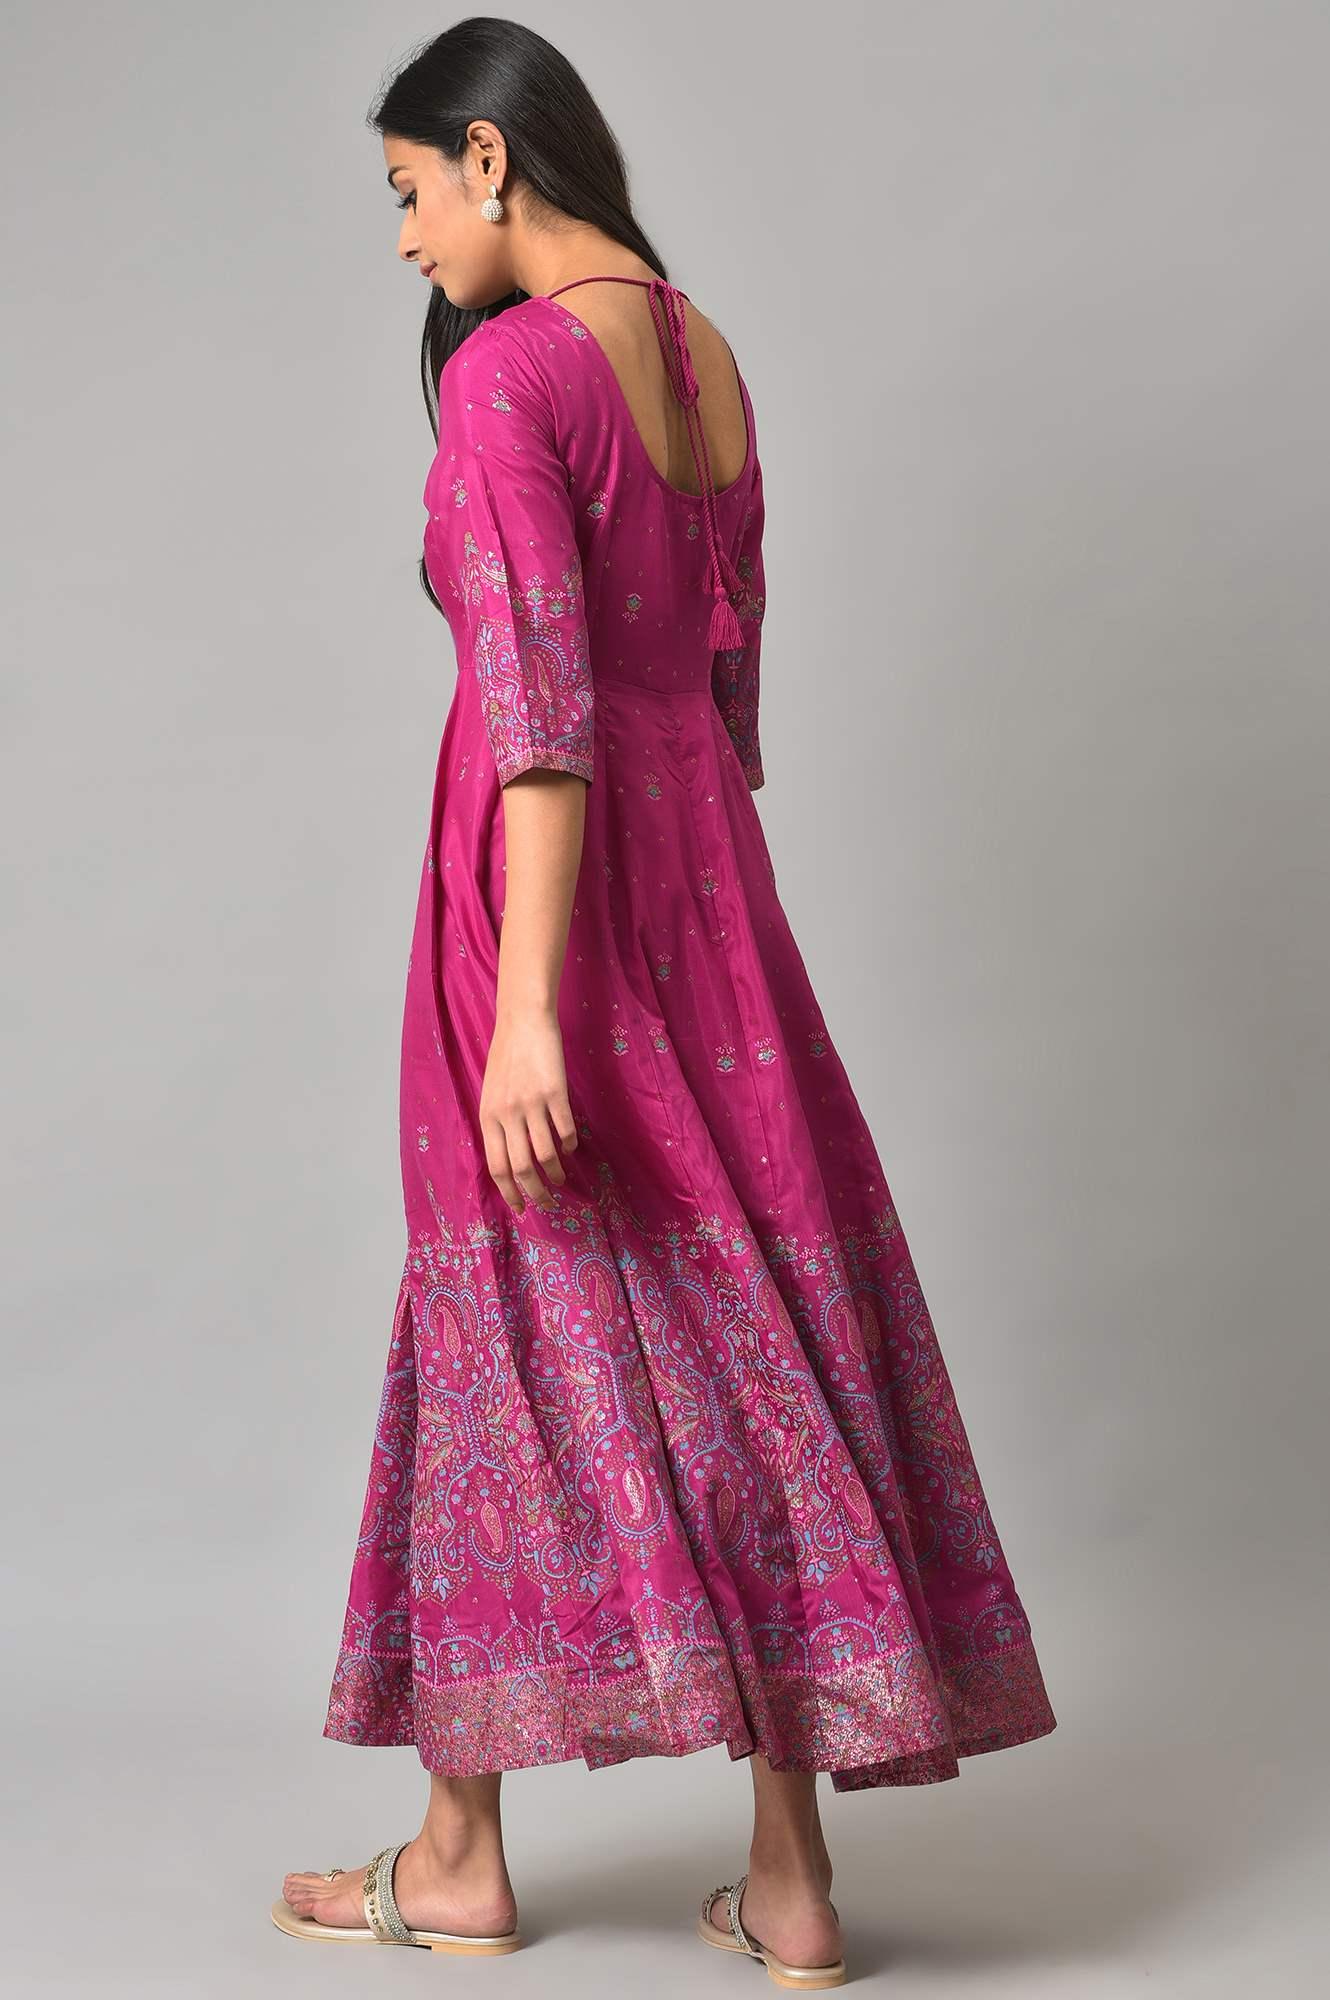 Purple Floral Printed Shantung Dress With Embroidery - wforwoman